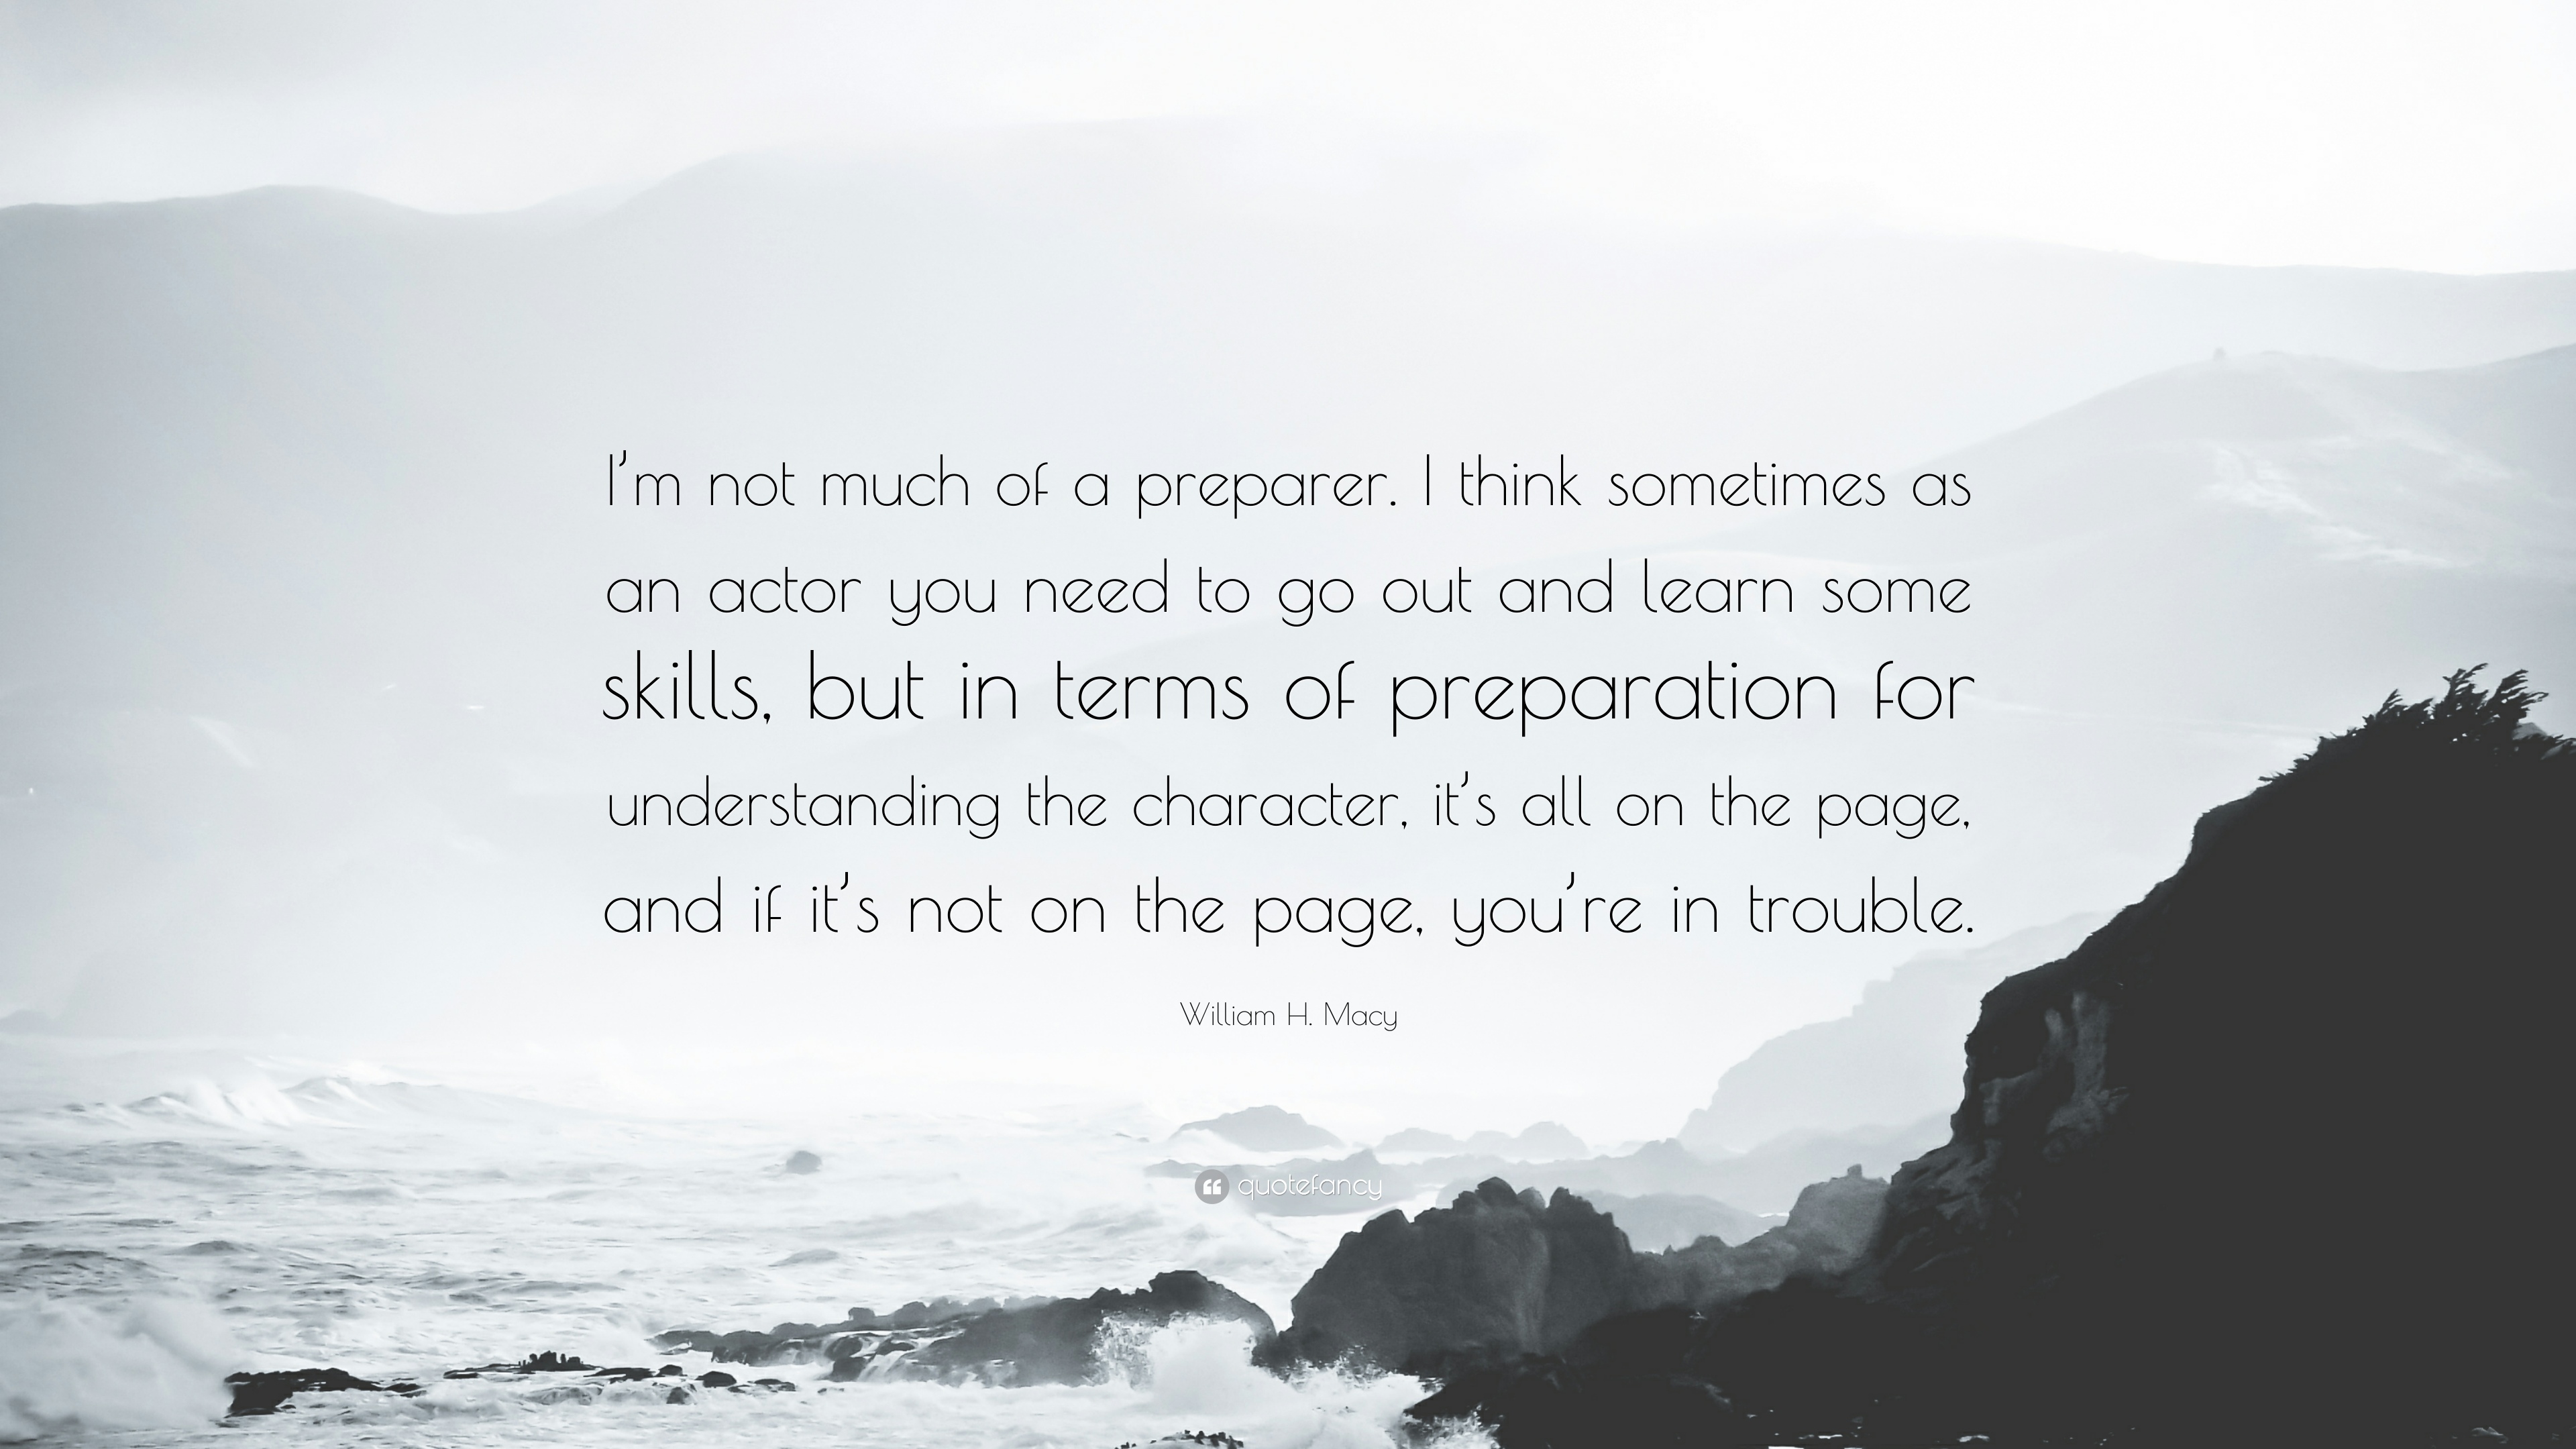 William H. Macy Quote: “I'm not much of a preparer. I think